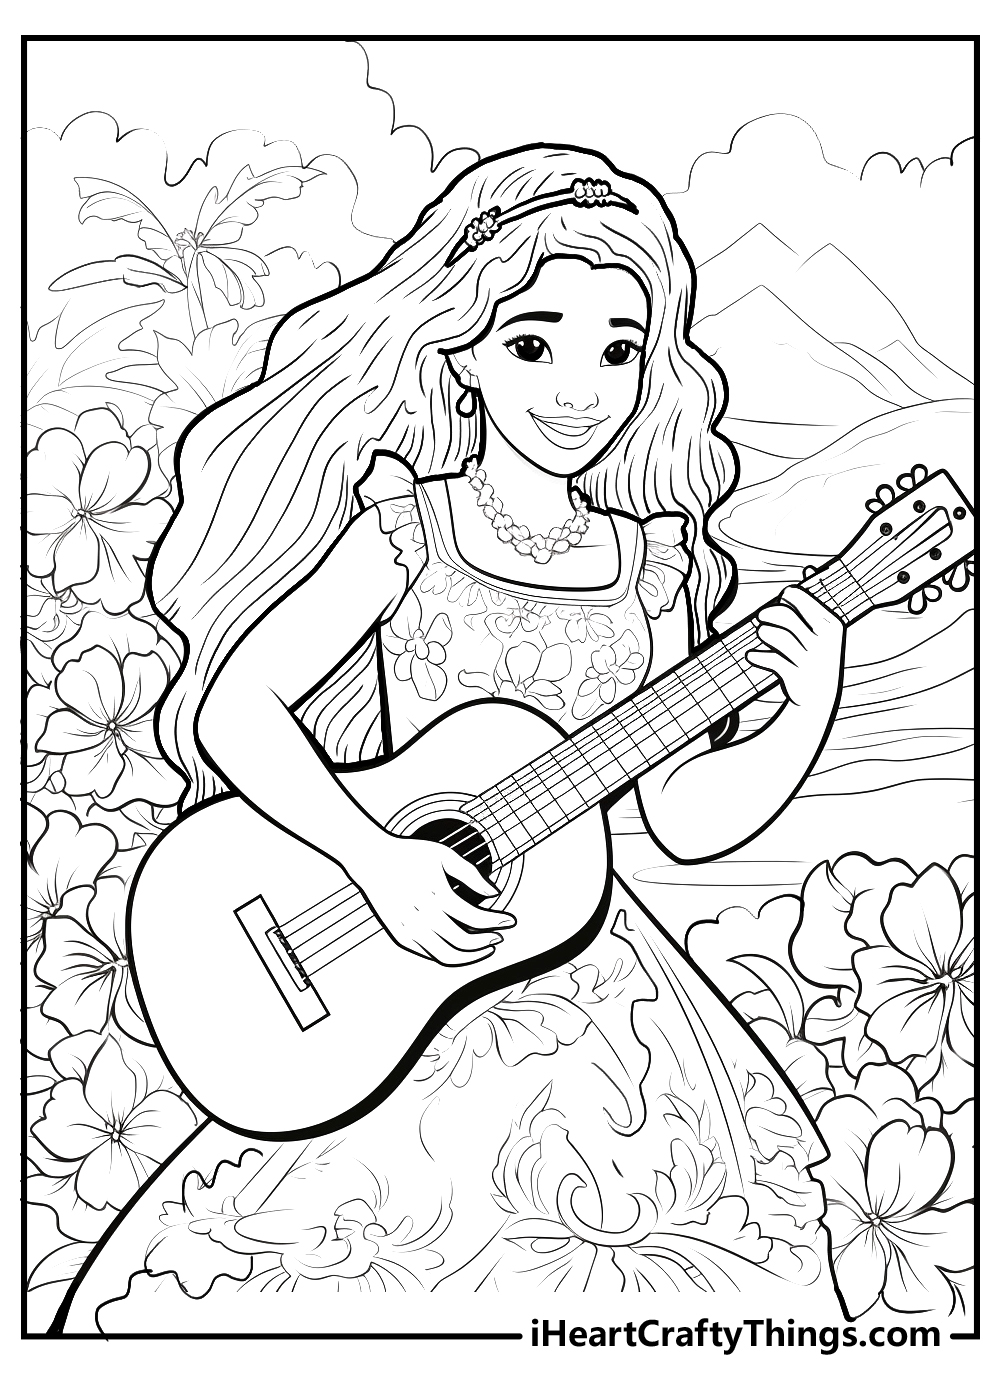 girl from Hawaii coloring pages